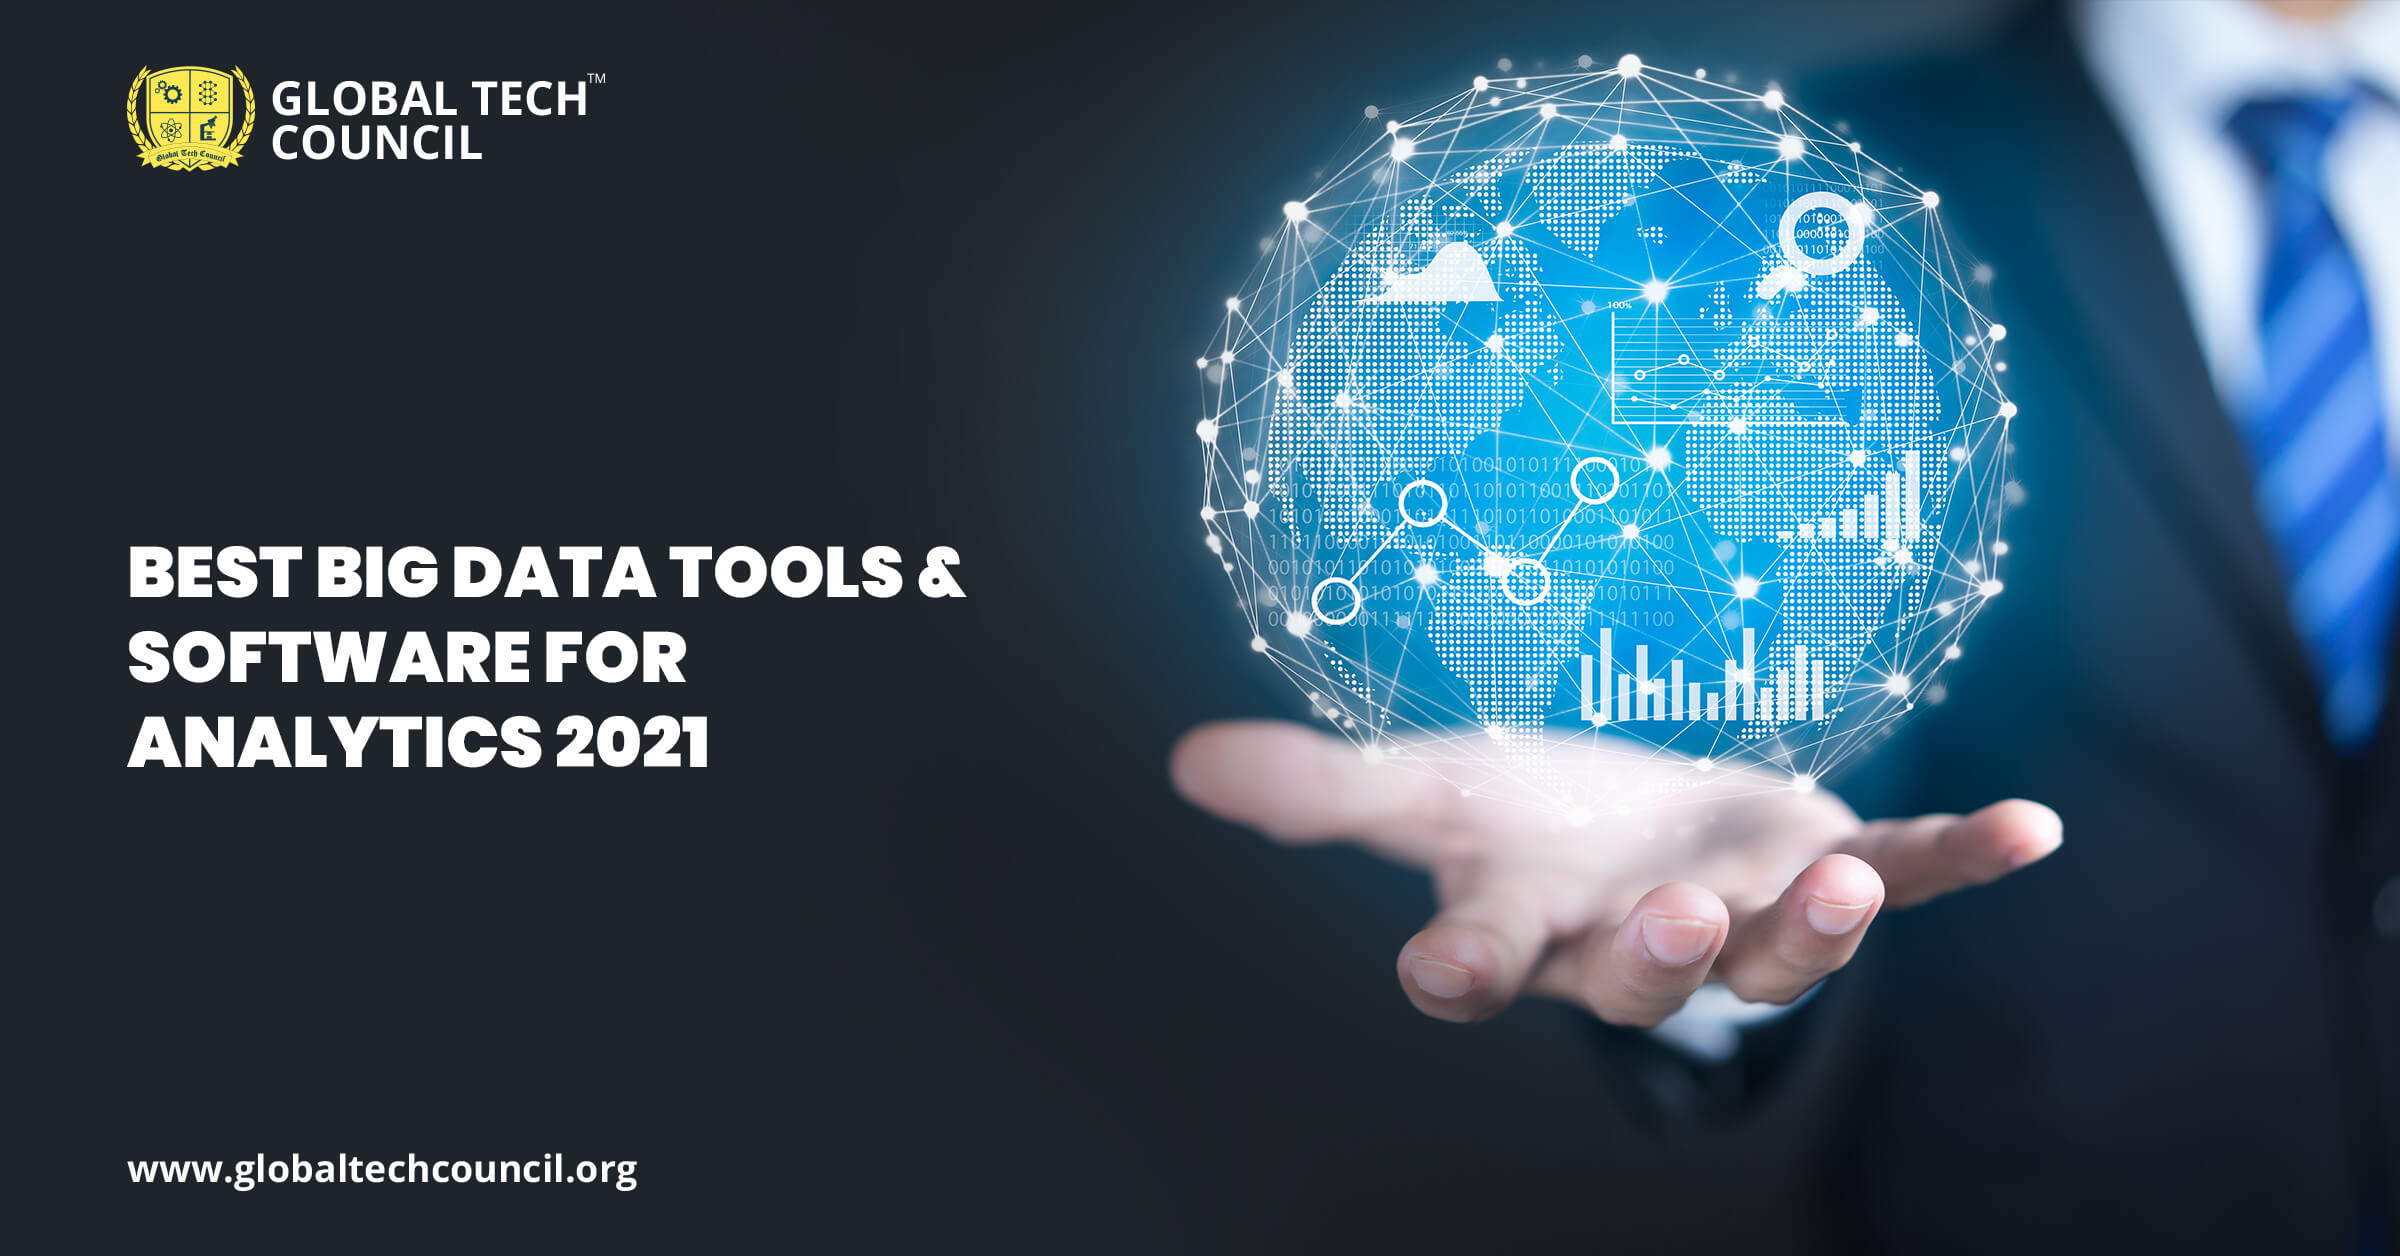 Best Big Data Tools & Software for Analytics 2021